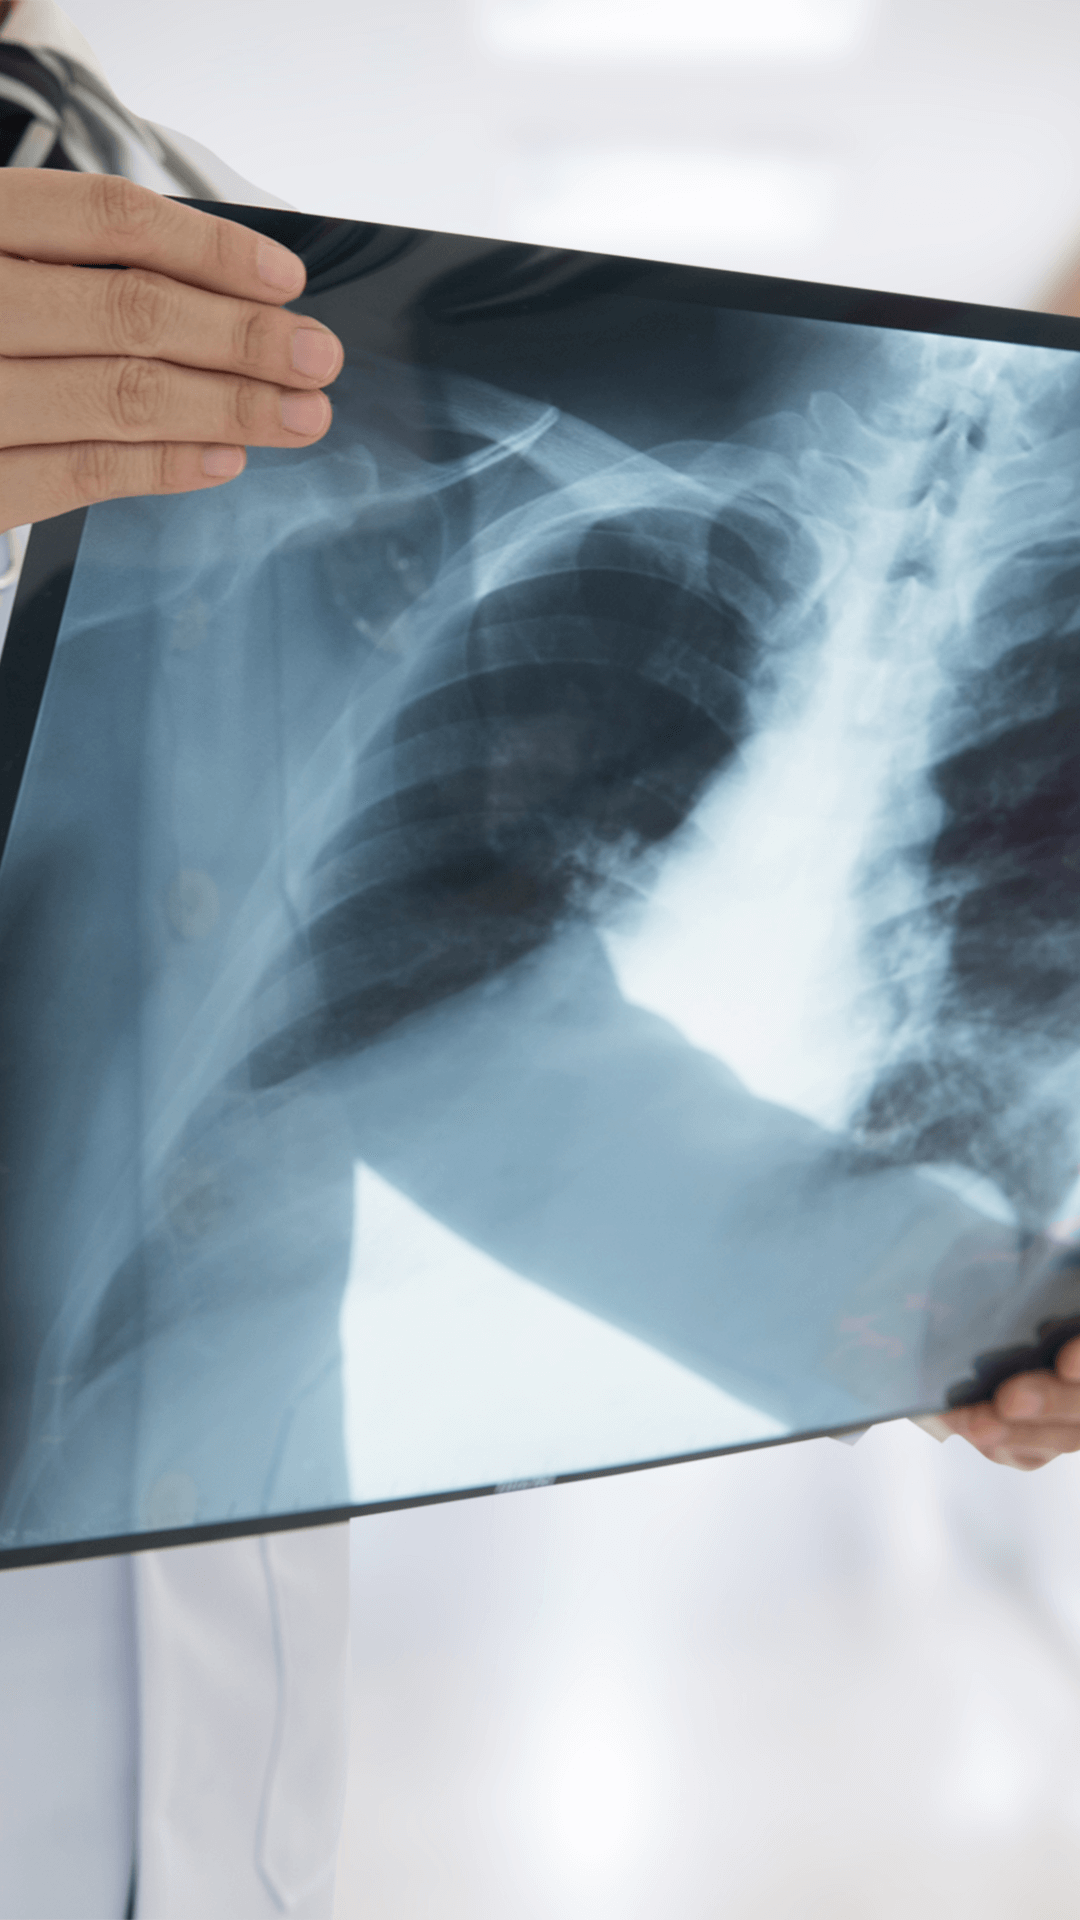 Doctor holds up an X-ray